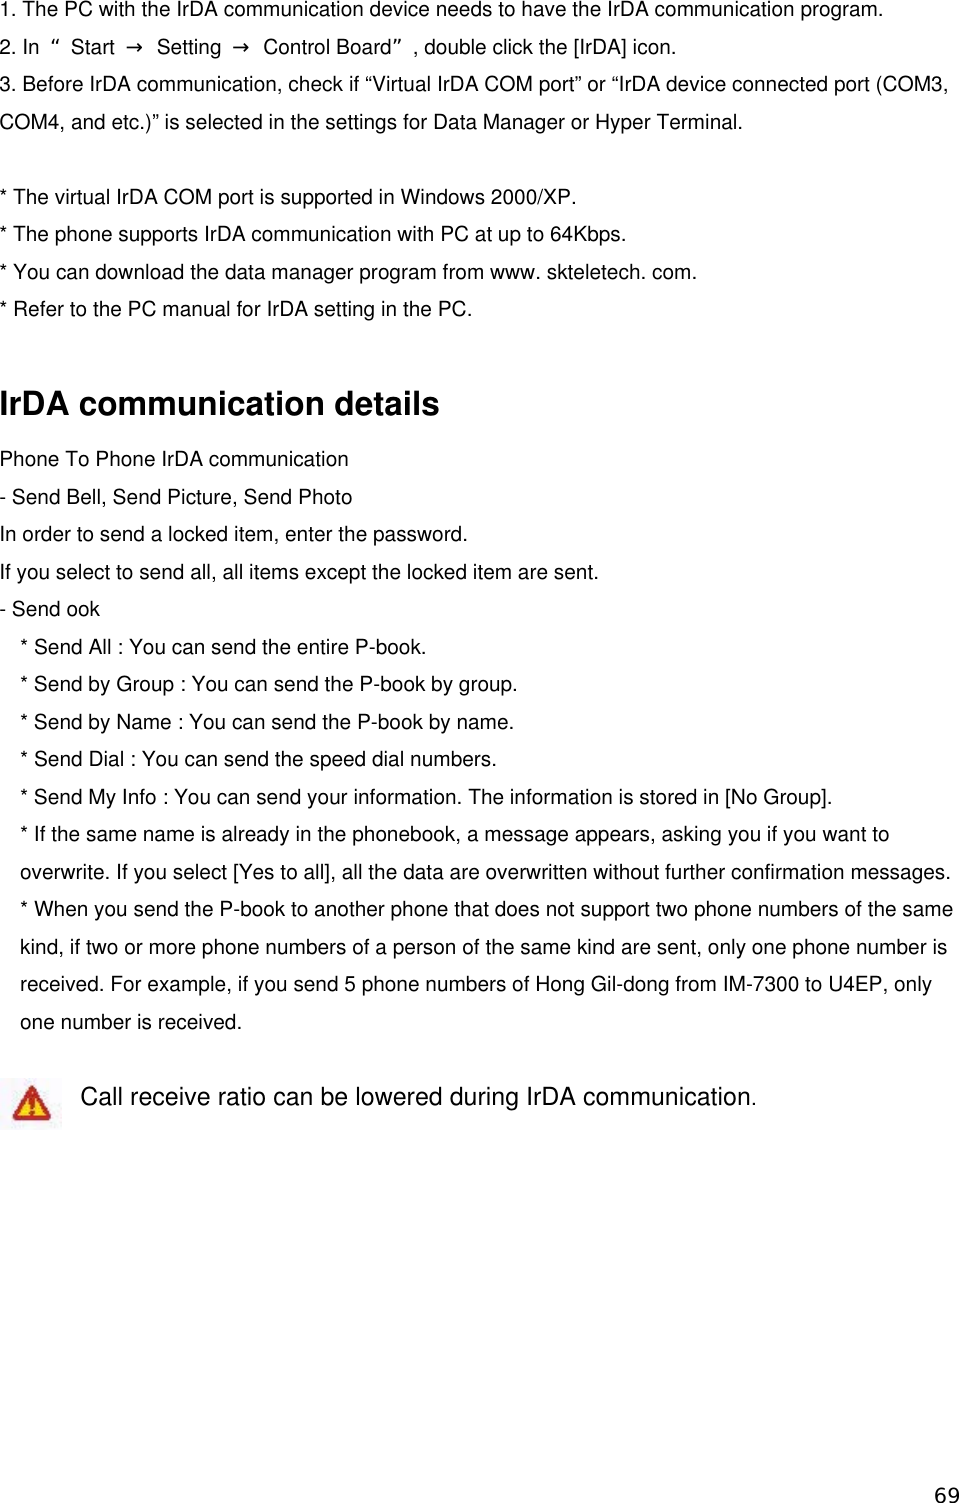 1. The PC with the IrDA communication device needs to have the IrDA communication program. 2. In  “Start  → Setting → Control Board”, double click the [IrDA] icon. 3. Before IrDA communication, check if “Virtual IrDA COM port” or “IrDA device connected port (COM3, COM4, and etc.)” is selected in the settings for Data Manager or Hyper Terminal.  * The virtual IrDA COM port is supported in Windows 2000/XP. * The phone supports IrDA communication with PC at up to 64Kbps. * You can download the data manager program from www. skteletech. com. * Refer to the PC manual for IrDA setting in the PC.  IrDA communication details Phone To Phone IrDA communication   - Send Bell, Send Picture, Send Photo In order to send a locked item, enter the password. If you select to send all, all items except the locked item are sent. - Send ook * Send All : You can send the entire P-book. * Send by Group : You can send the P-book by group. * Send by Name : You can send the P-book by name. * Send Dial : You can send the speed dial numbers. * Send My Info : You can send your information. The information is stored in [No Group]. * If the same name is already in the phonebook, a message appears, asking you if you want to overwrite. If you select [Yes to all], all the data are overwritten without further confirmation messages. * When you send the P-book to another phone that does not support two phone numbers of the same kind, if two or more phone numbers of a person of the same kind are sent, only one phone number is received. For example, if you send 5 phone numbers of Hong Gil-dong from IM-7300 to U4EP, only one number is received.    Call receive ratio can be lowered during IrDA communication.  69